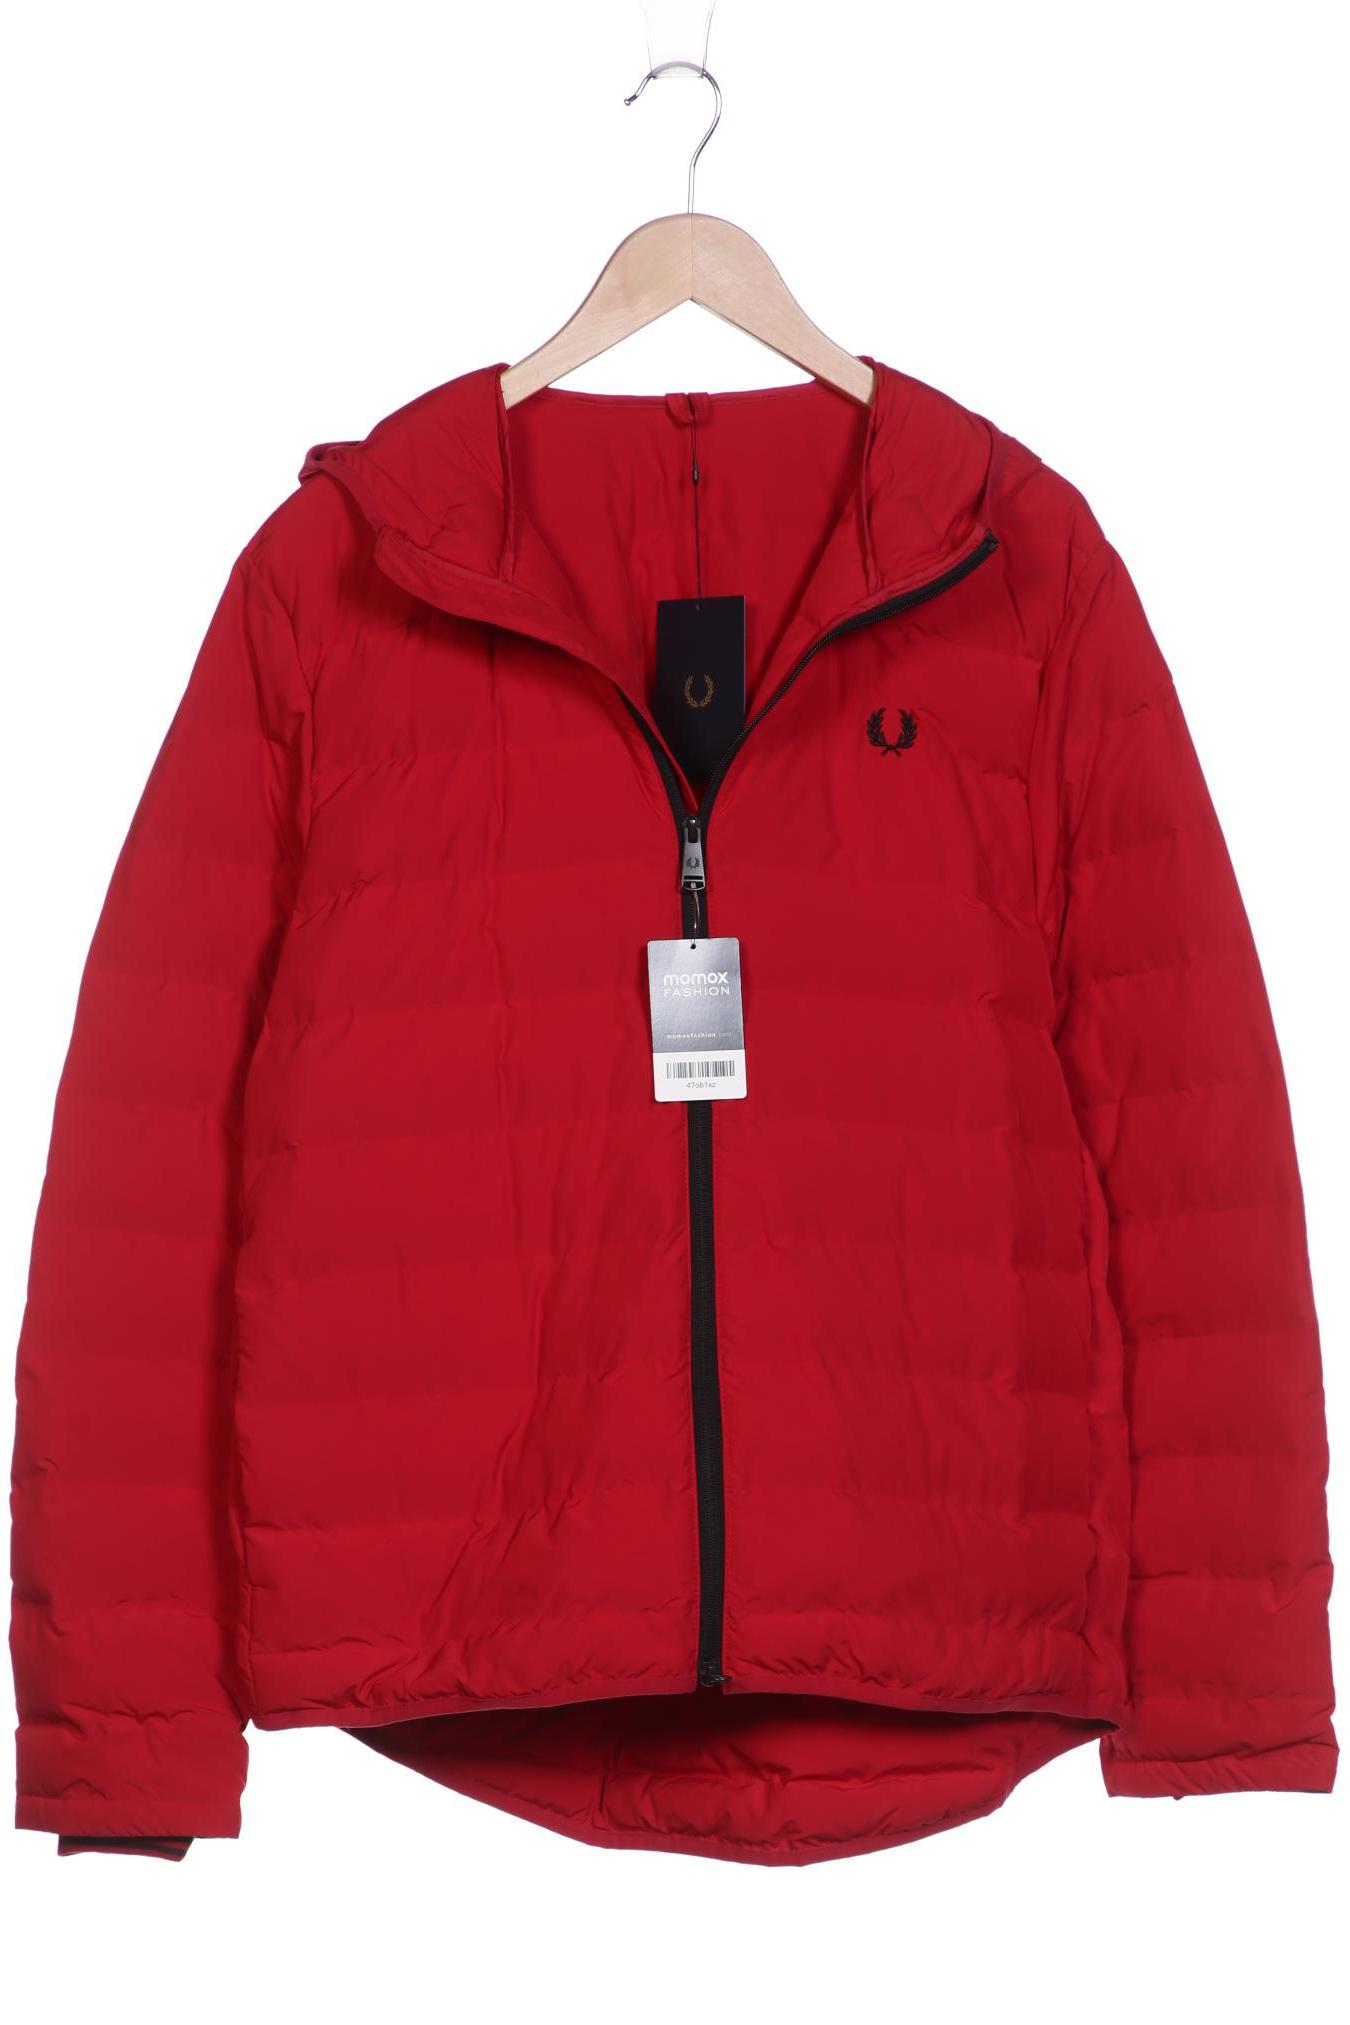 Fred Perry Herren Jacke, rot, Gr. 52 von Fred Perry